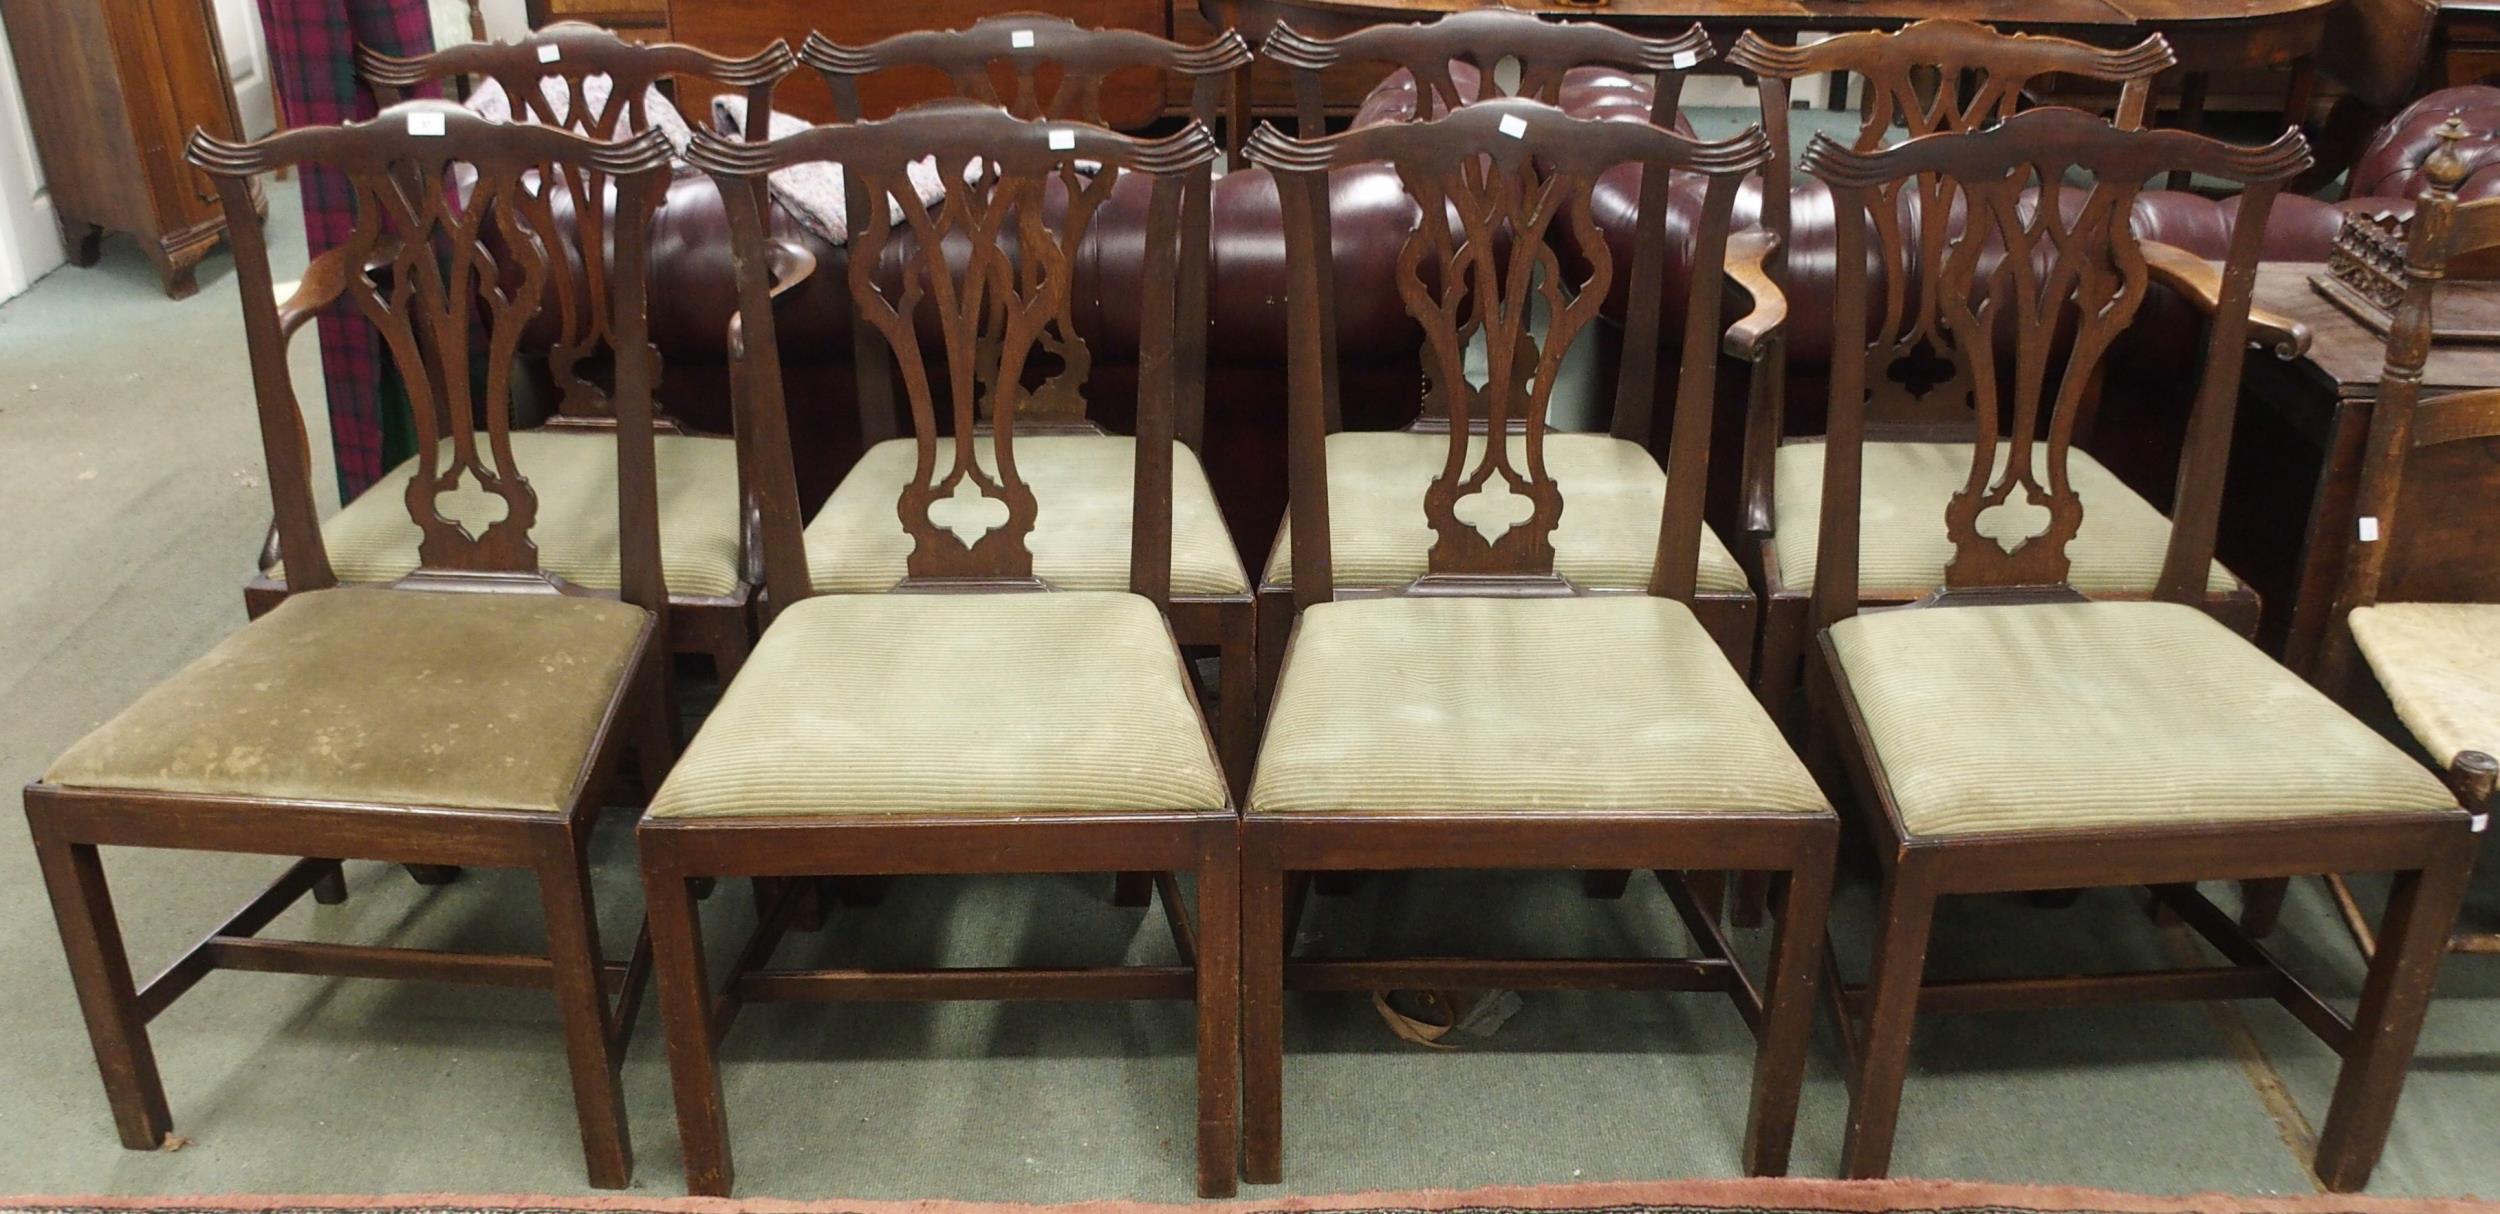 A set of eight 19th century mahogany dining chairs with scrolled fretwork splats on square